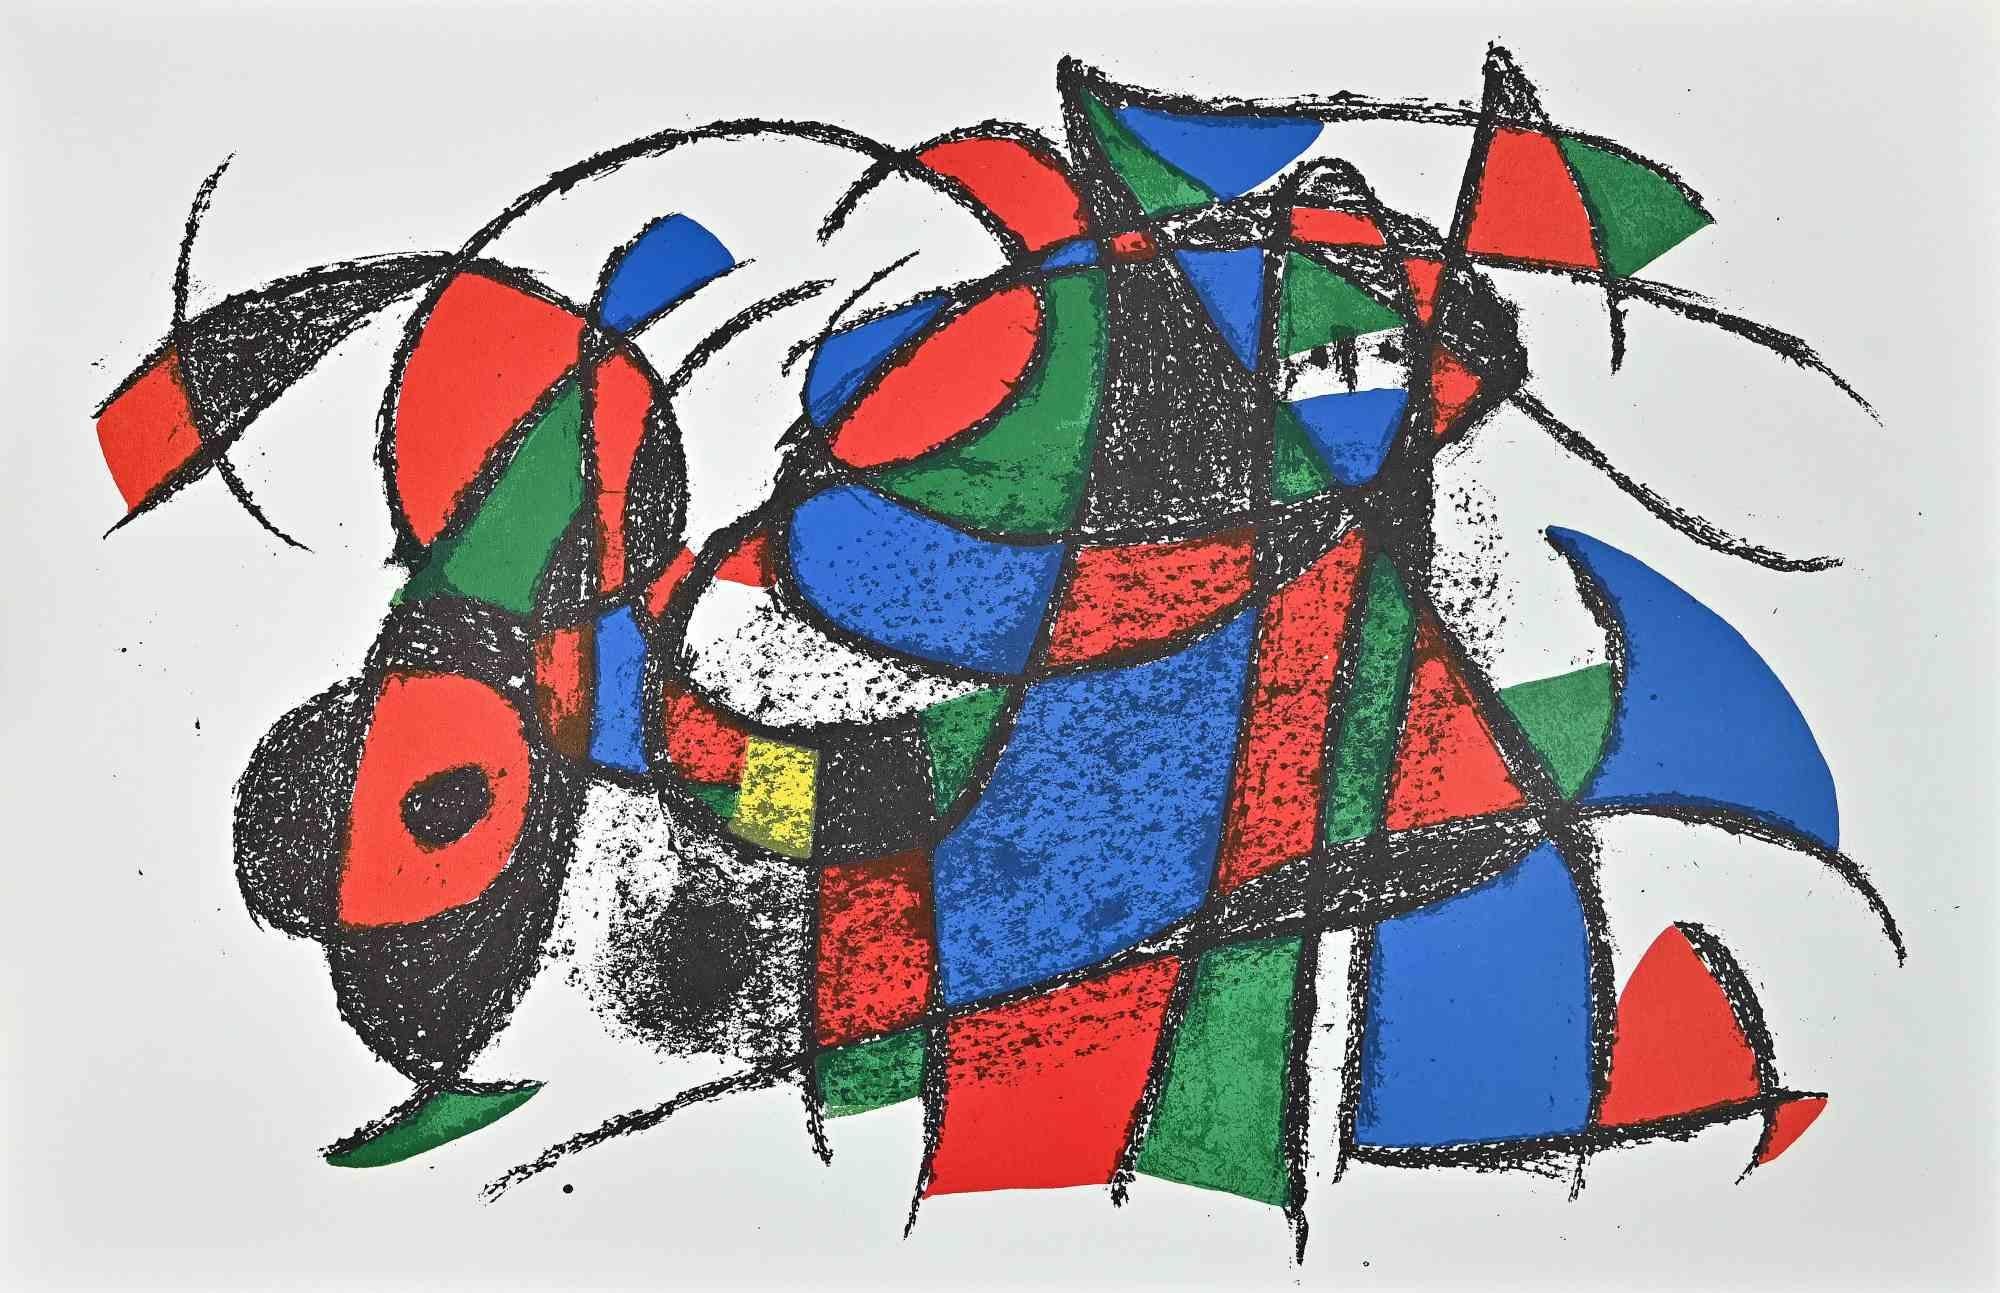 Joan Miró Abstract Print - Abstract Composition - Lithograph by J. Mirò - 1972